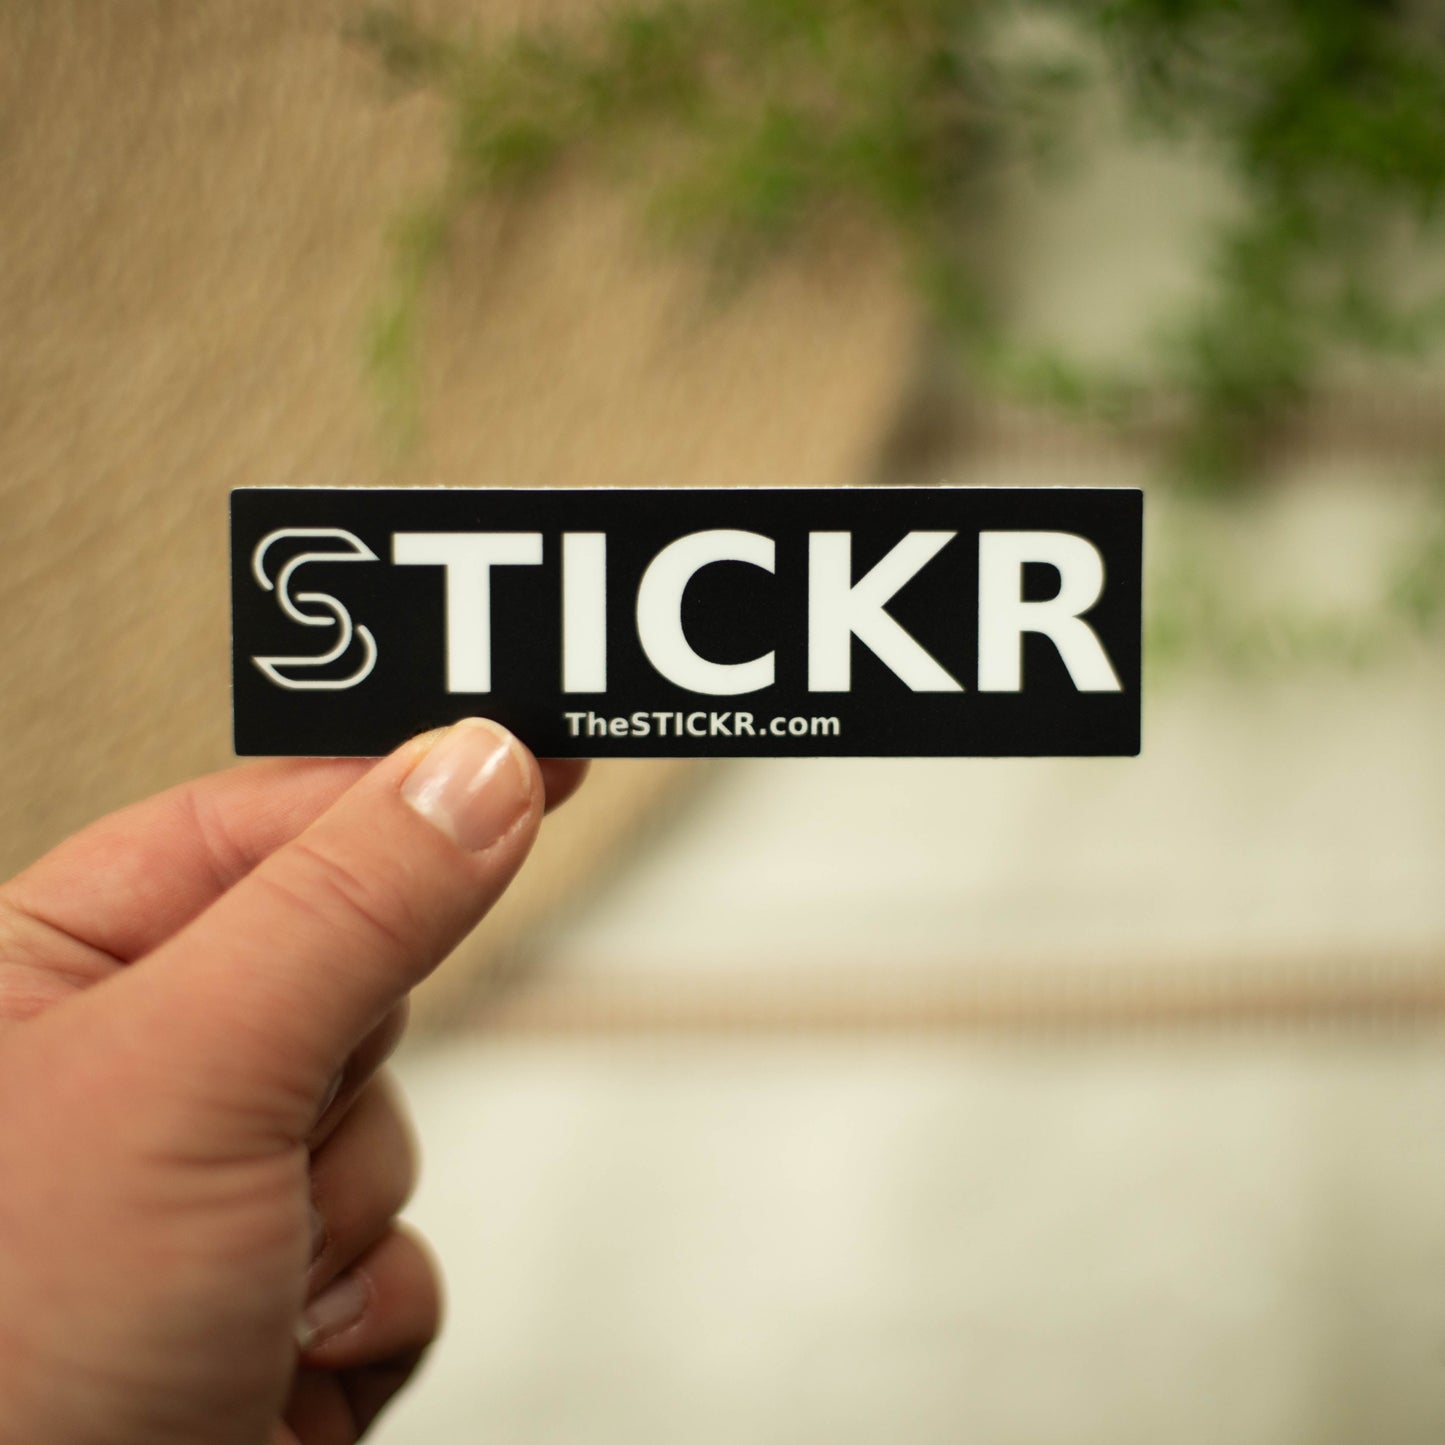 A hand holding a black rectangular shaped vinyl sticker of the Stickr logo and website